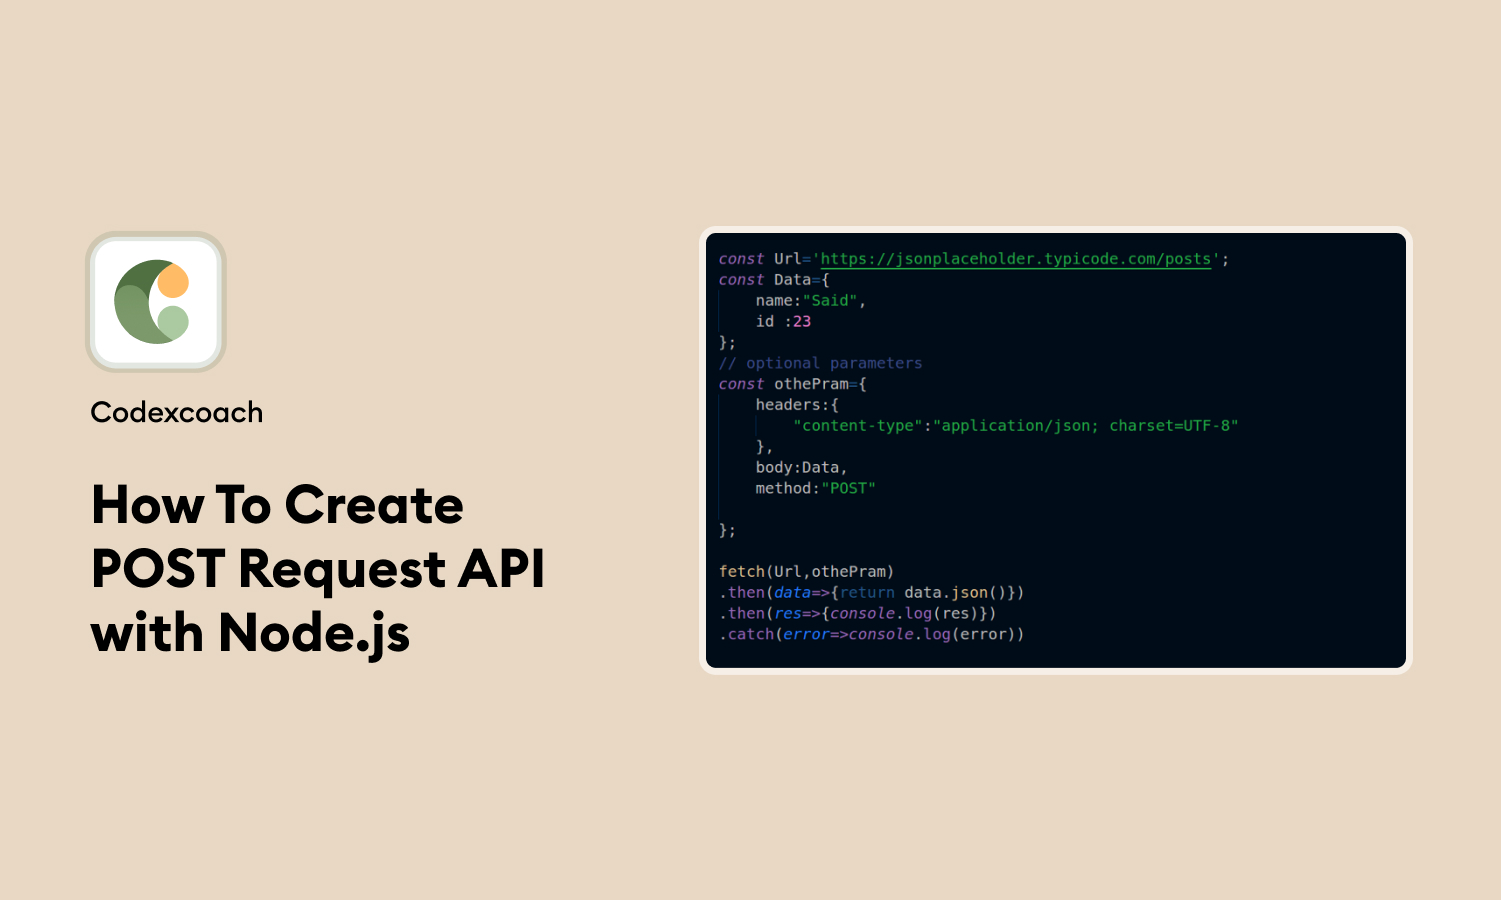 How To Create POST Request API with Node.js